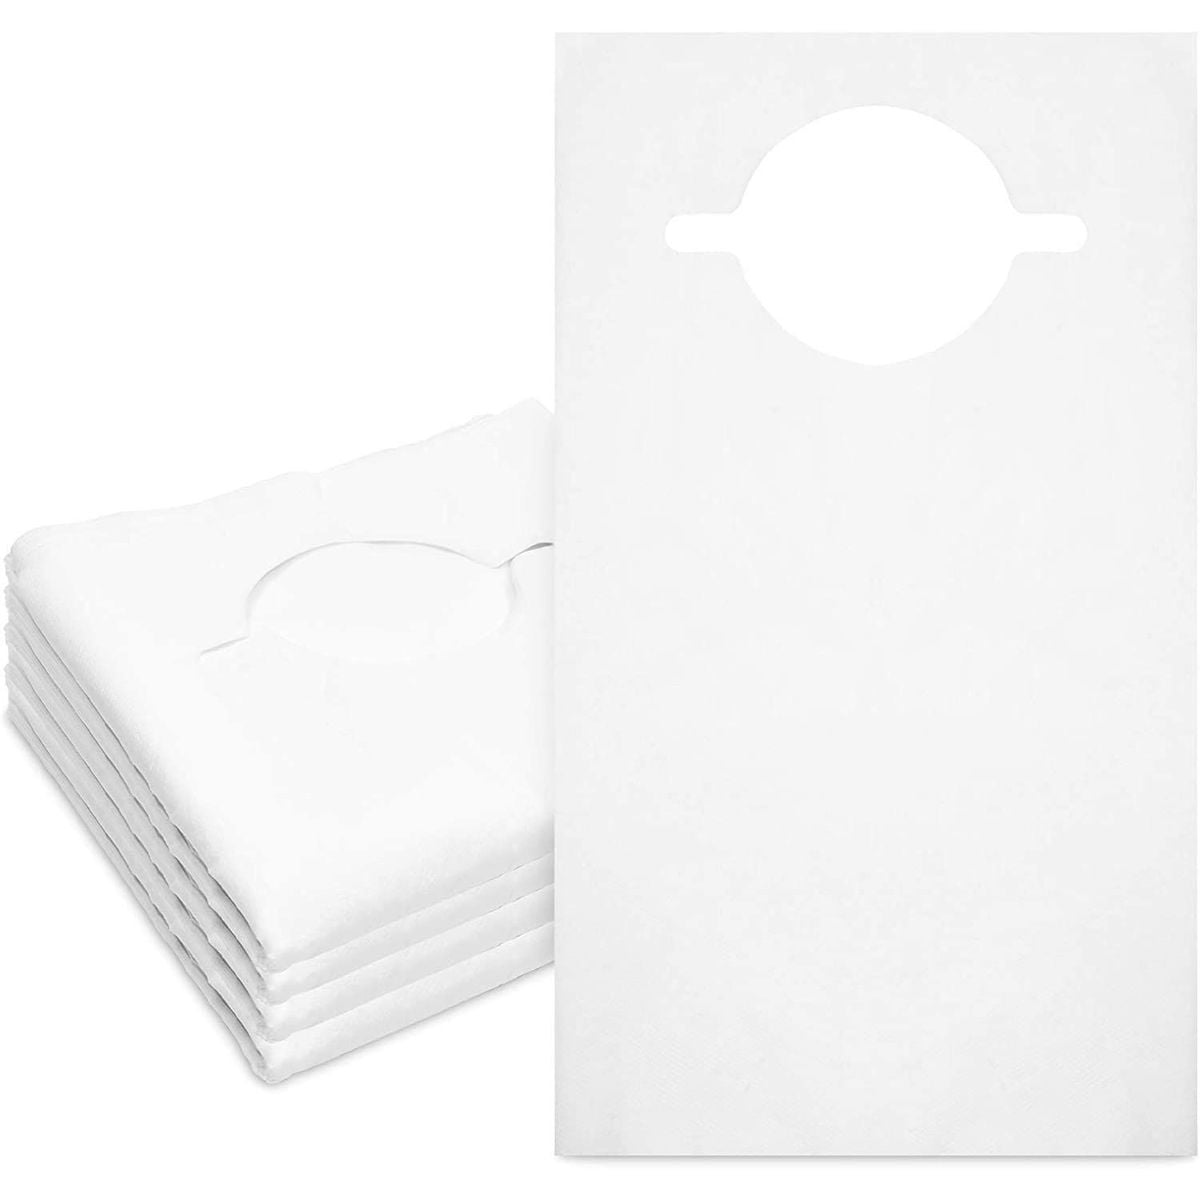 100 PACK OF DISPOSABLE PLASTIC WHITE CHILDREN'S BIBS FREE SHIPPING 